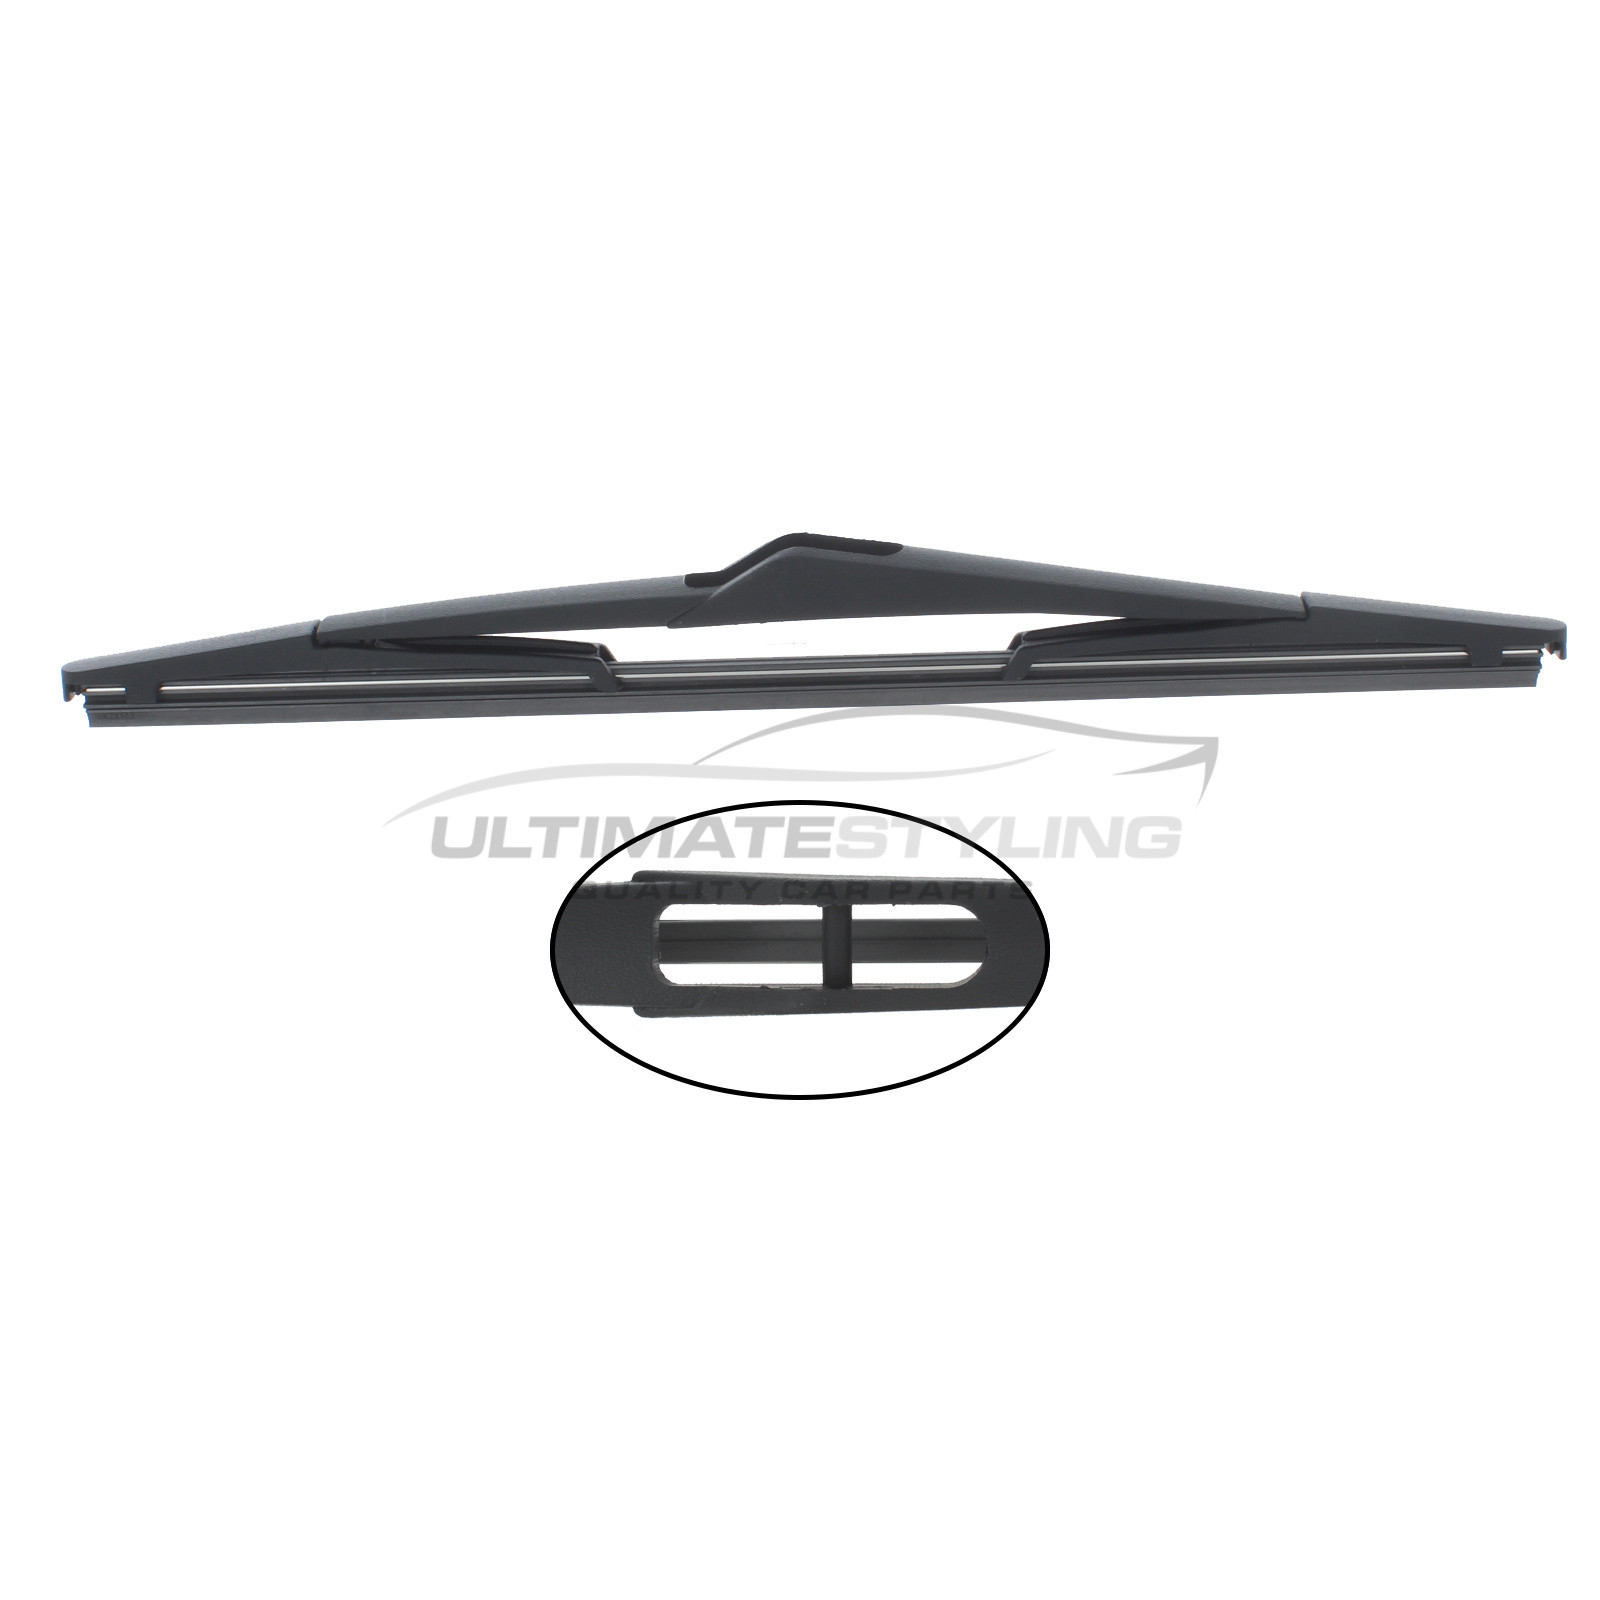 Rear Wiper Blade for Vauxhall Corsa